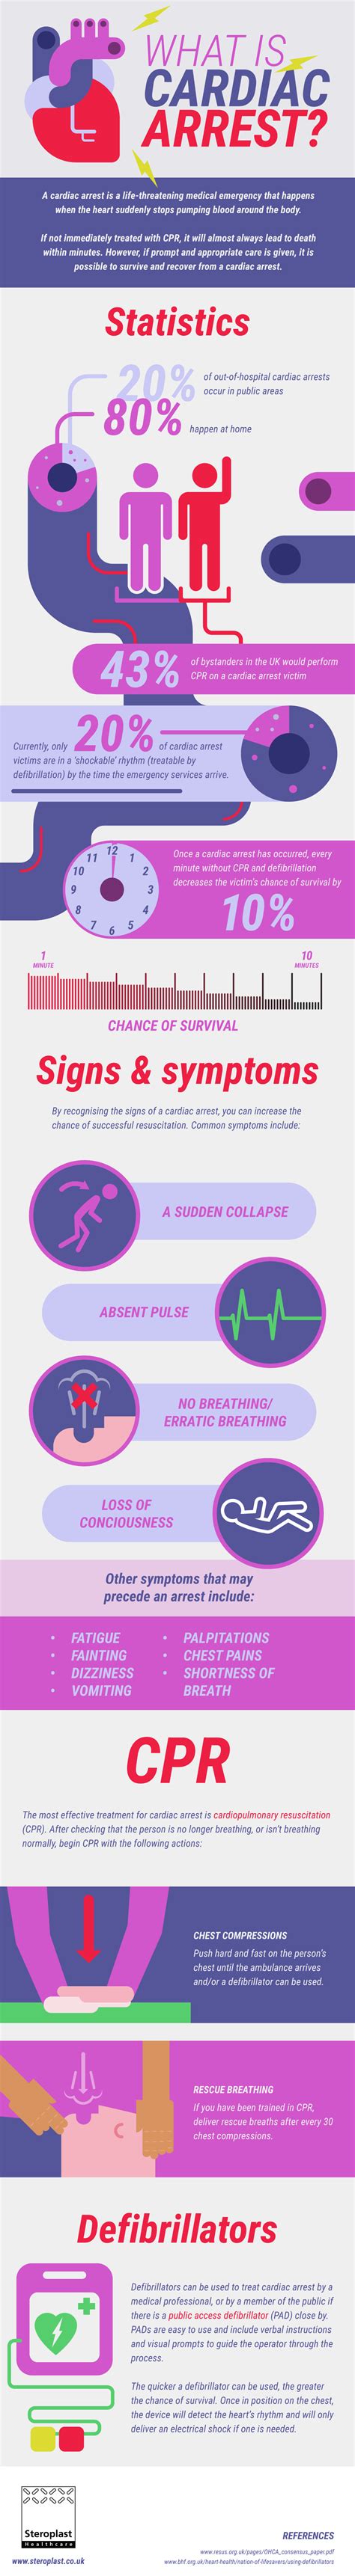 Sca usually causes death if it is not treated within minutes. Why Do Cardiac Arrests Happen? - Infographic